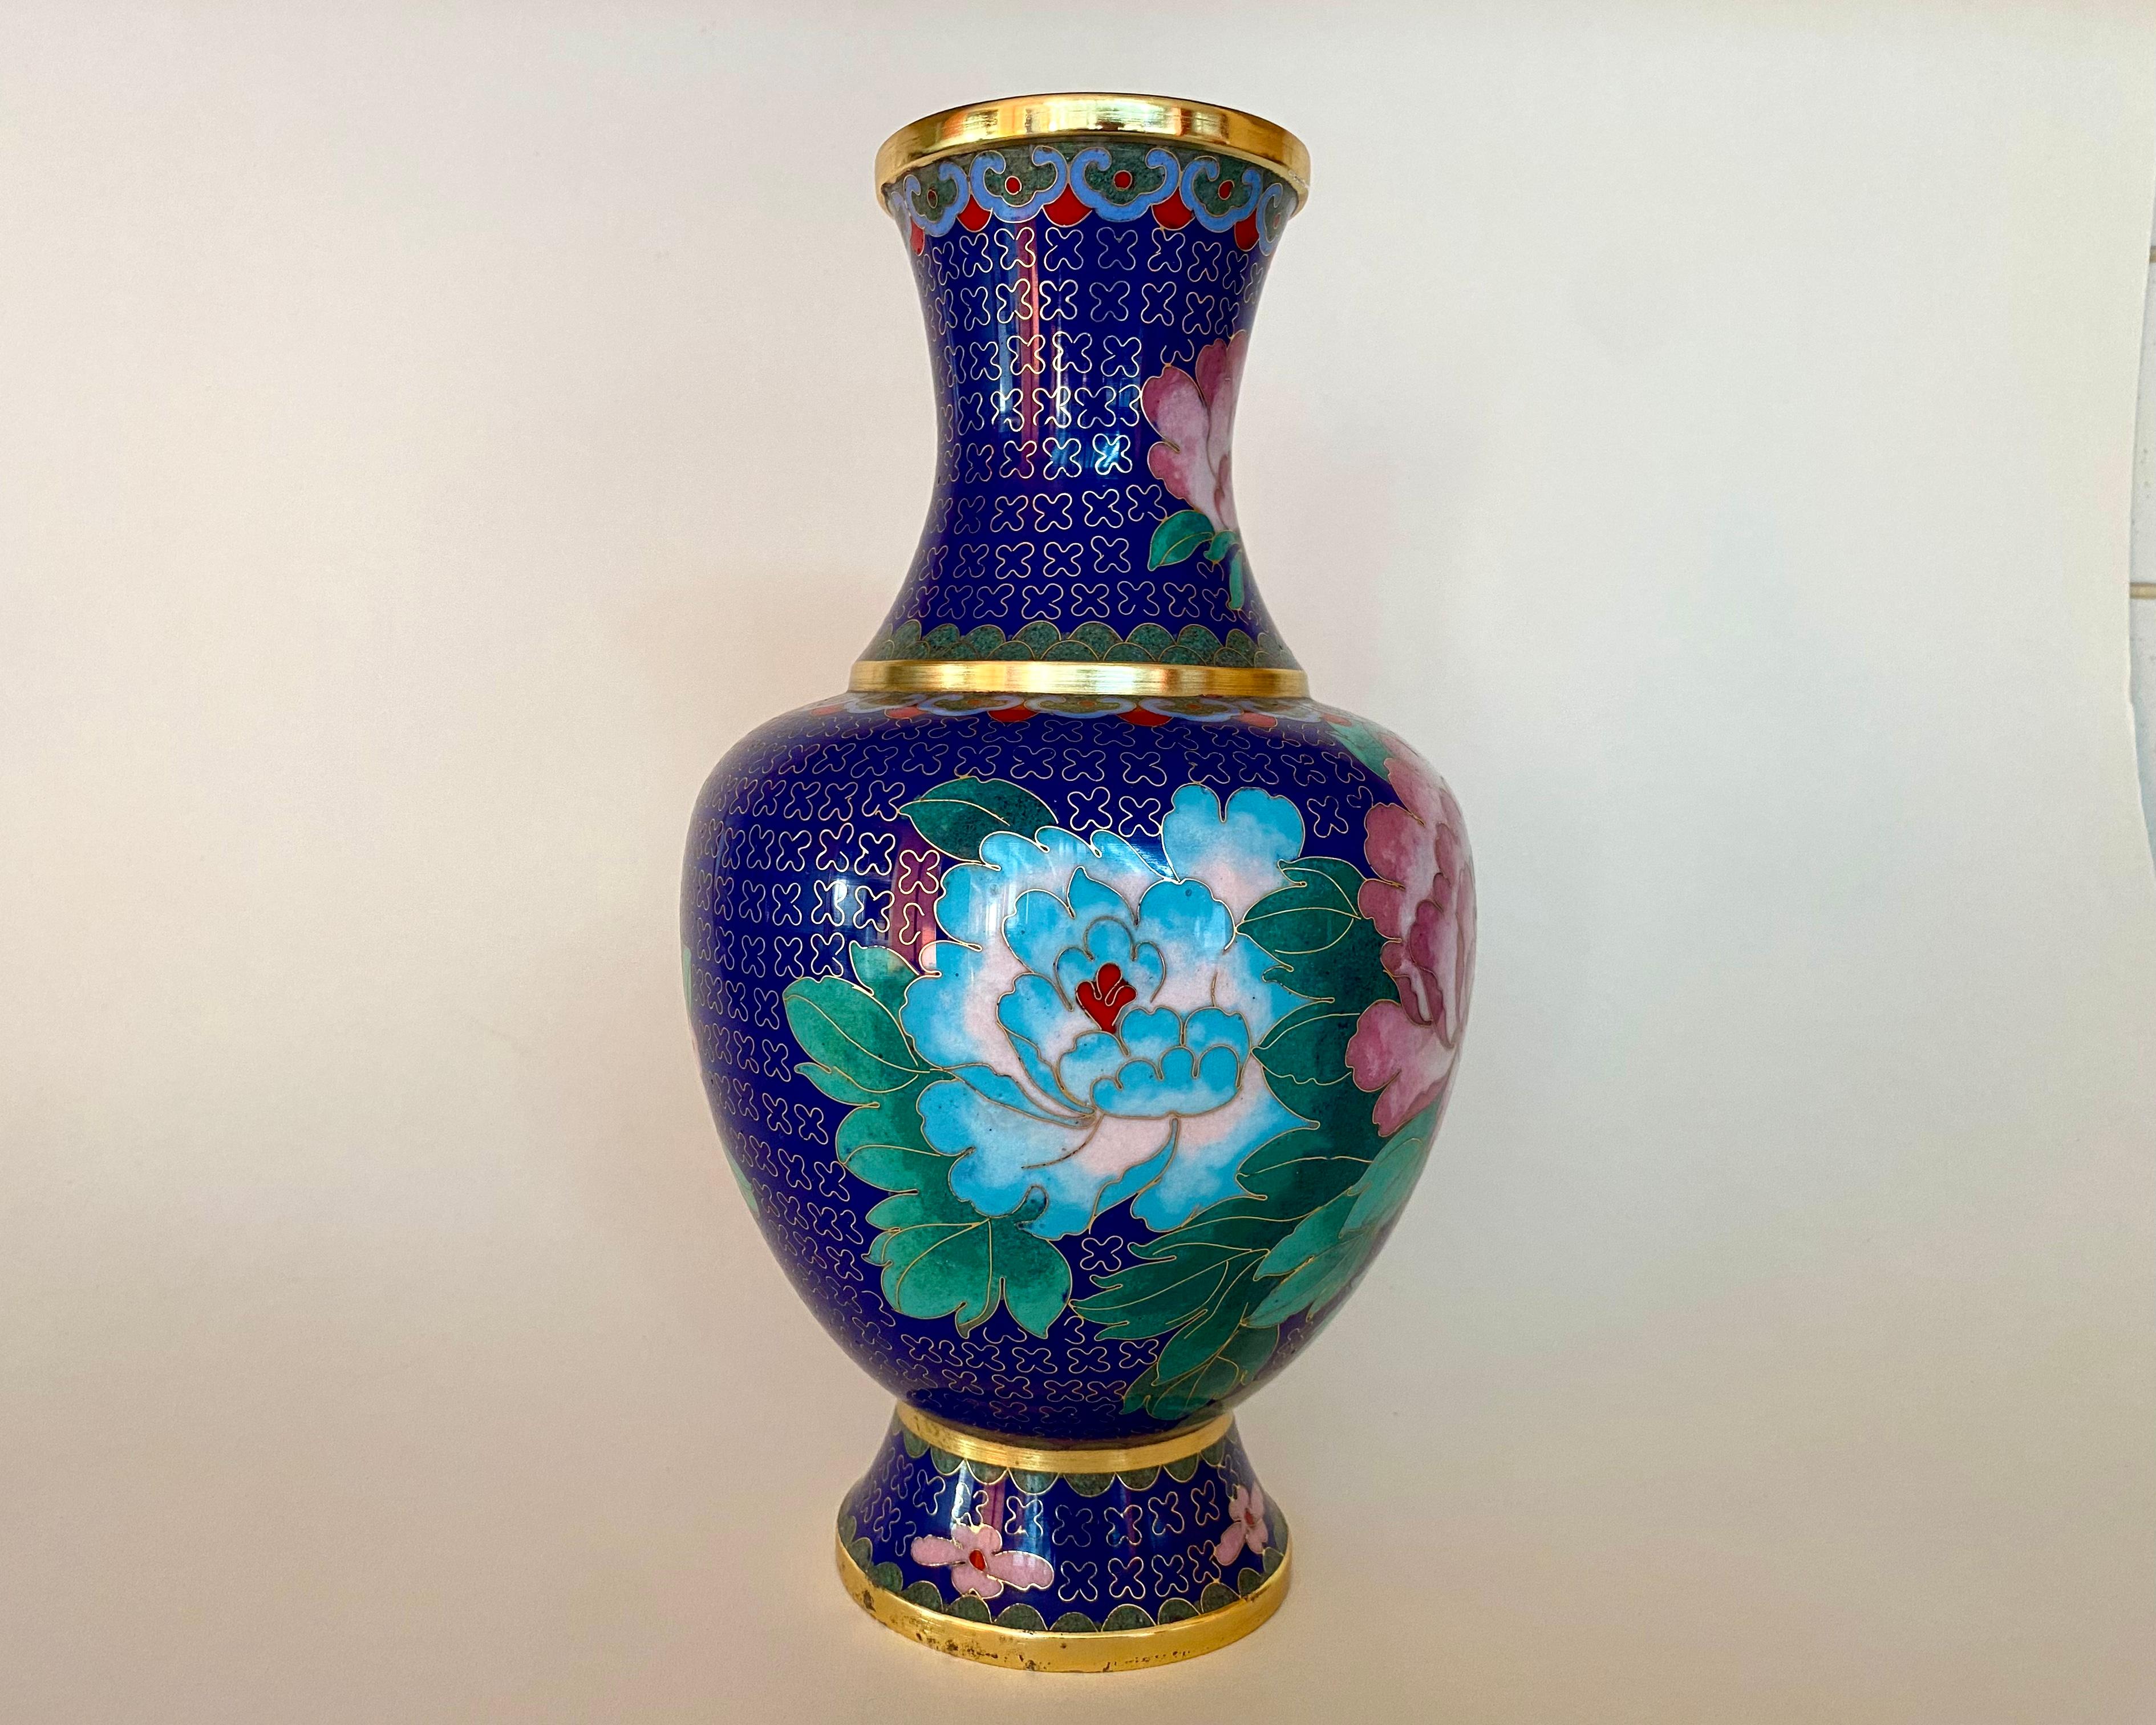 Chinese Vintage Enamel and Brass Vase in Cloisonné Technique, China, 1980 For Sale